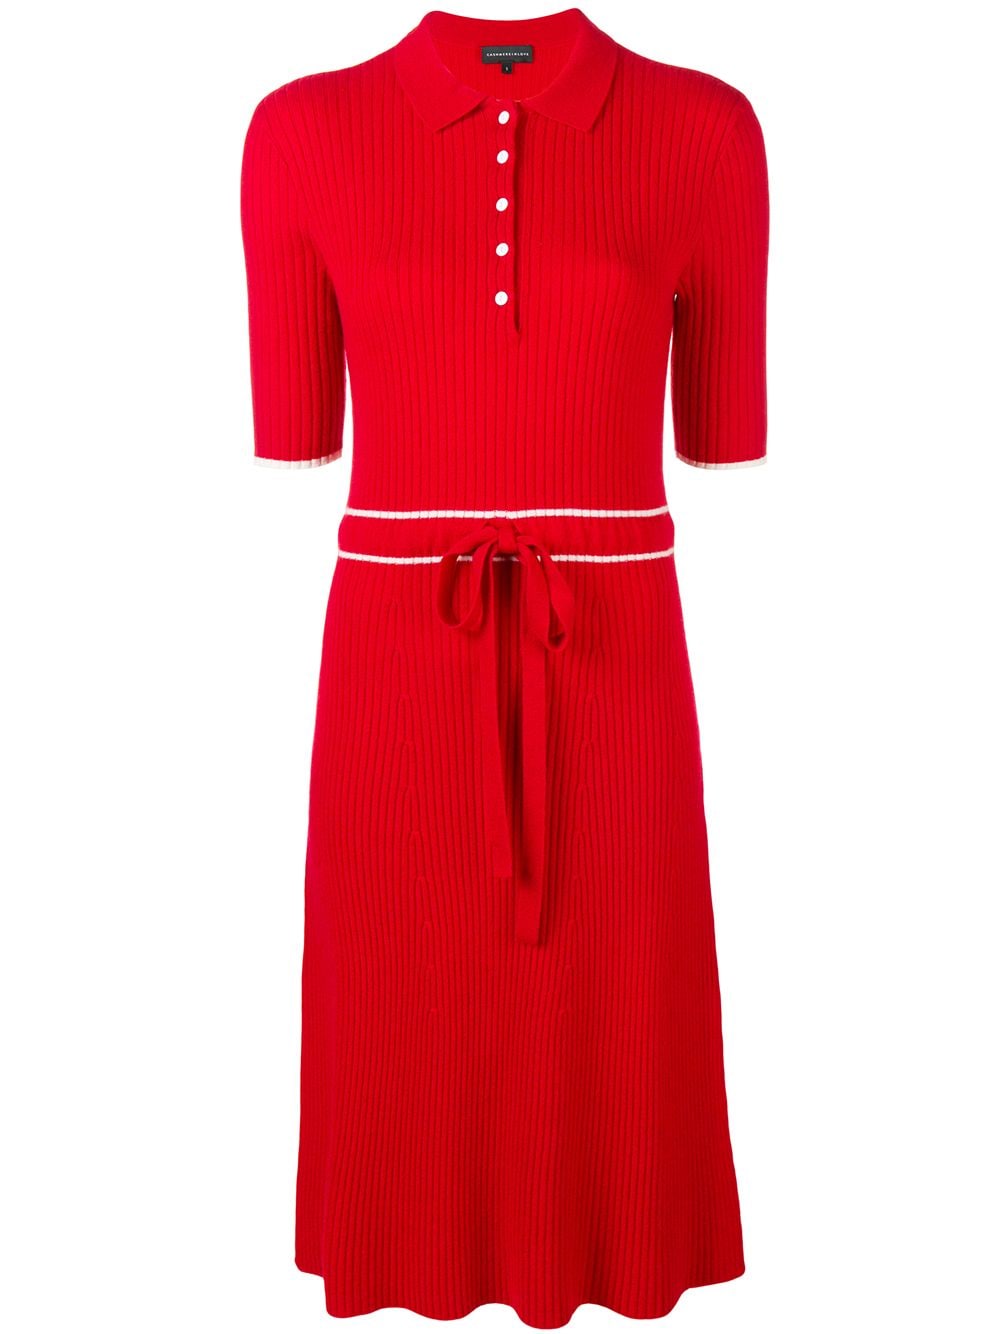 Cashmere In Love cashmere blend ribbed knit dress - Red von Cashmere In Love